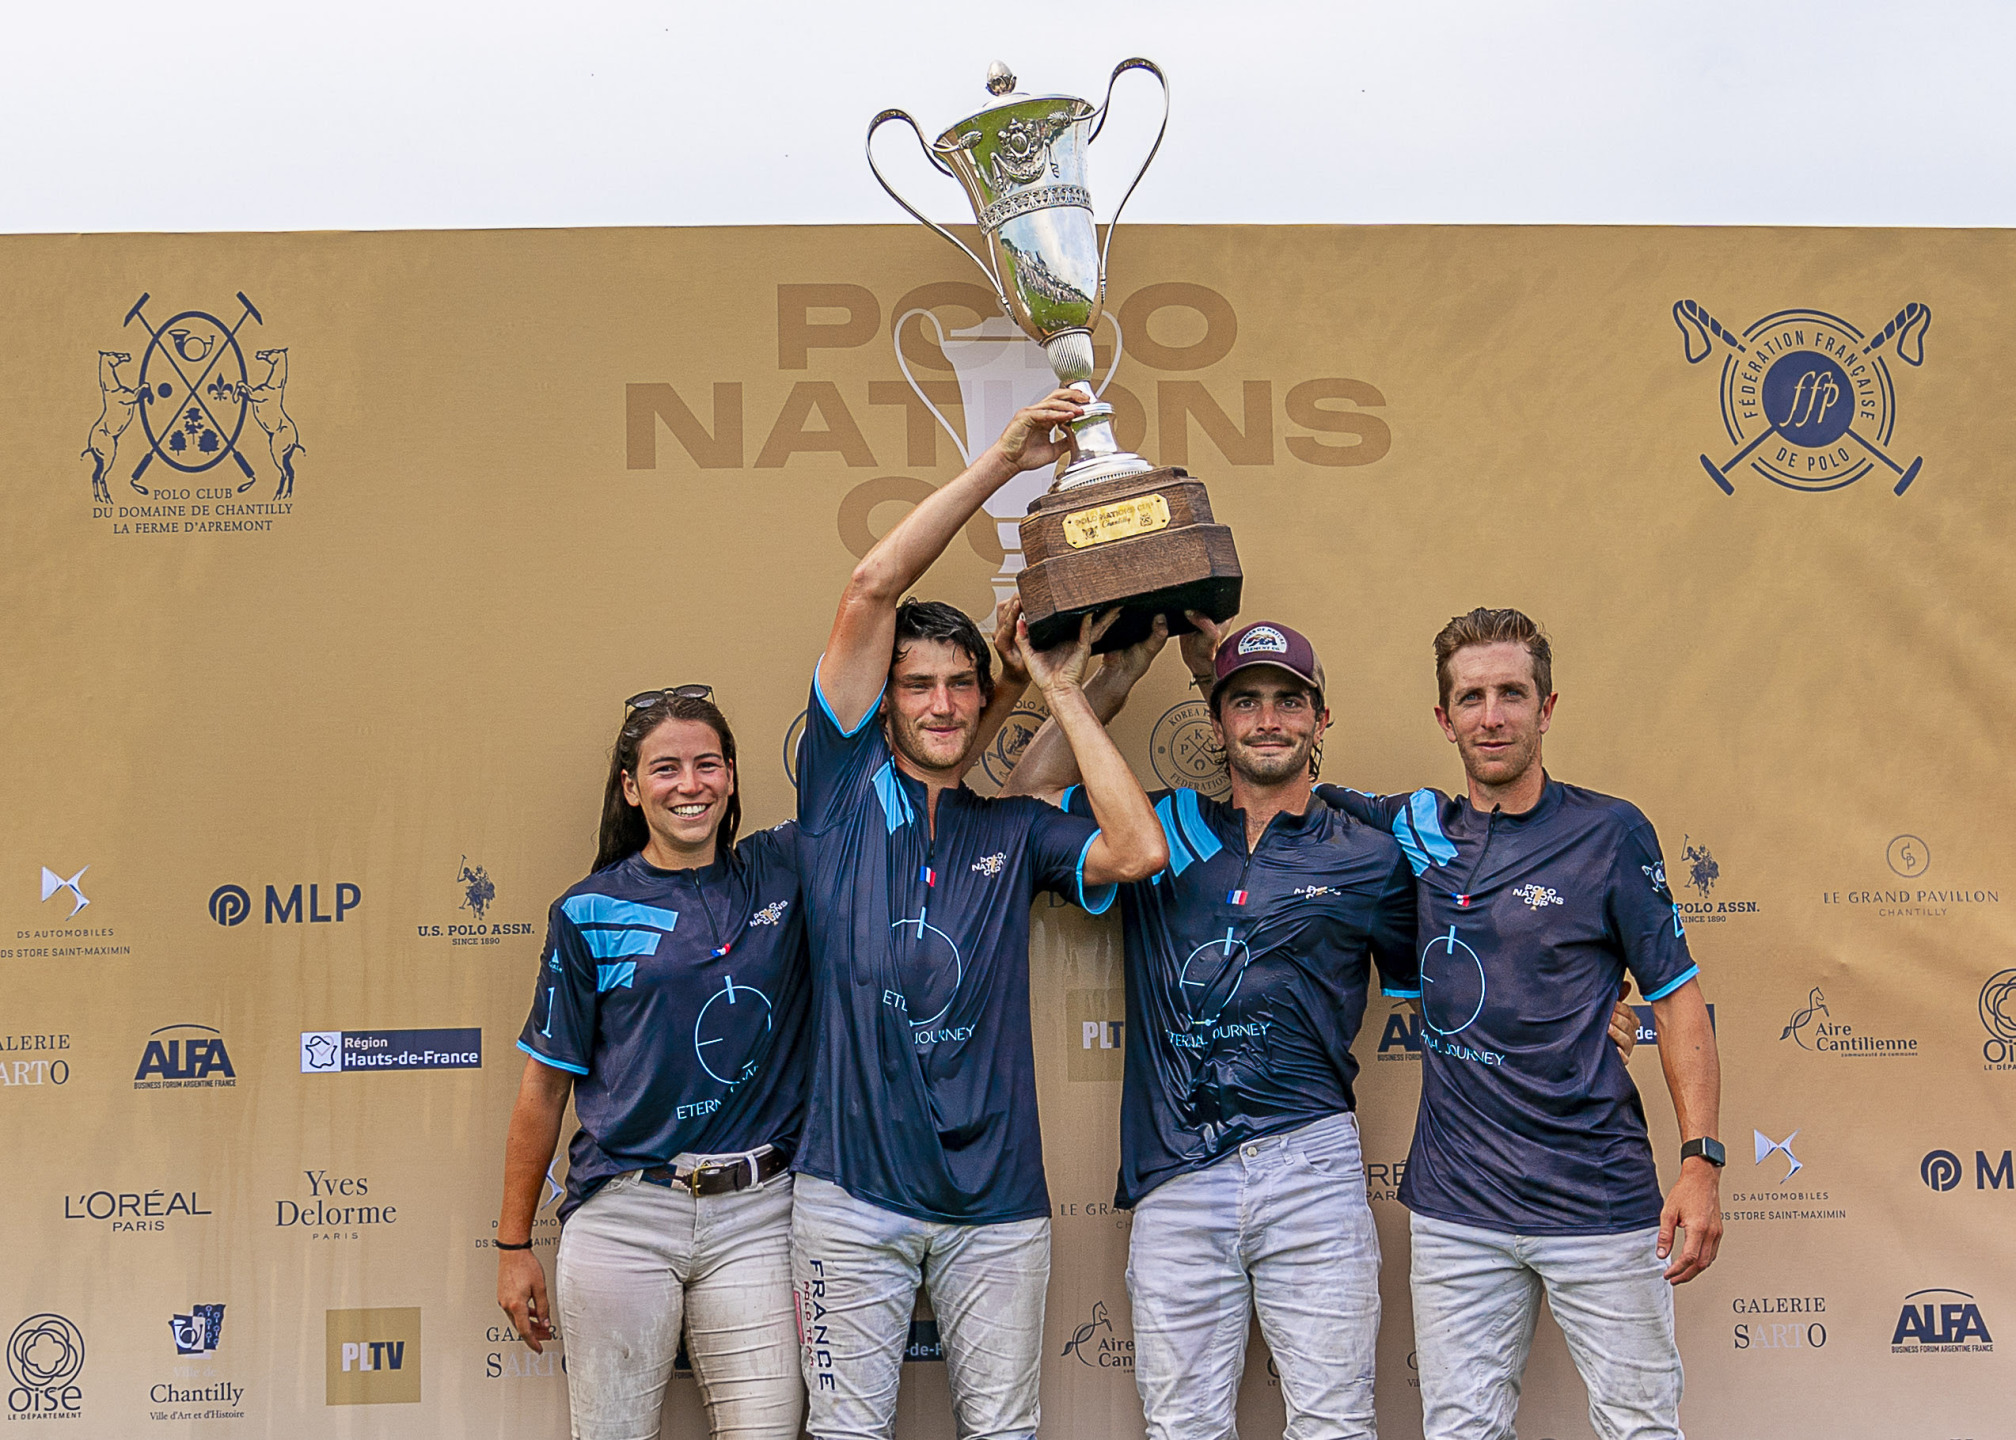 First Polo Nations Cup - Elena Venot (hcp 1), Dorian Bulteau (hcp 3), Louis Jarrige (hcp 4) and Julien Reynes (hcp 4) won the first Polo Nations Cup